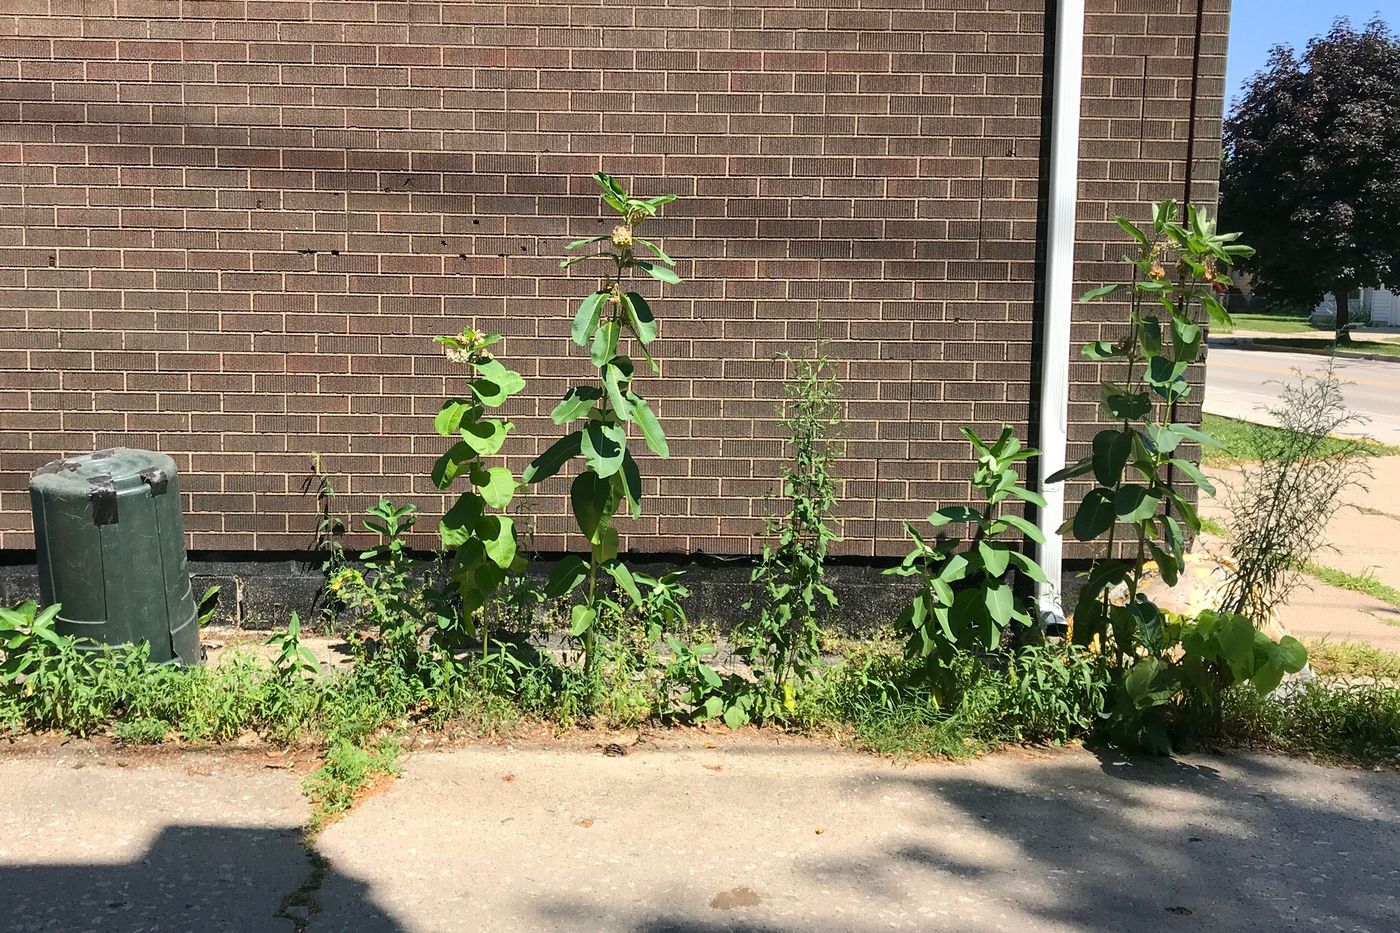 Milkweed can thrive in unexpected places. Laurie Stokes says, “This patch was started by my neighbors who would drop milkweed seeds throughout our neighborhood on their evening walks.”